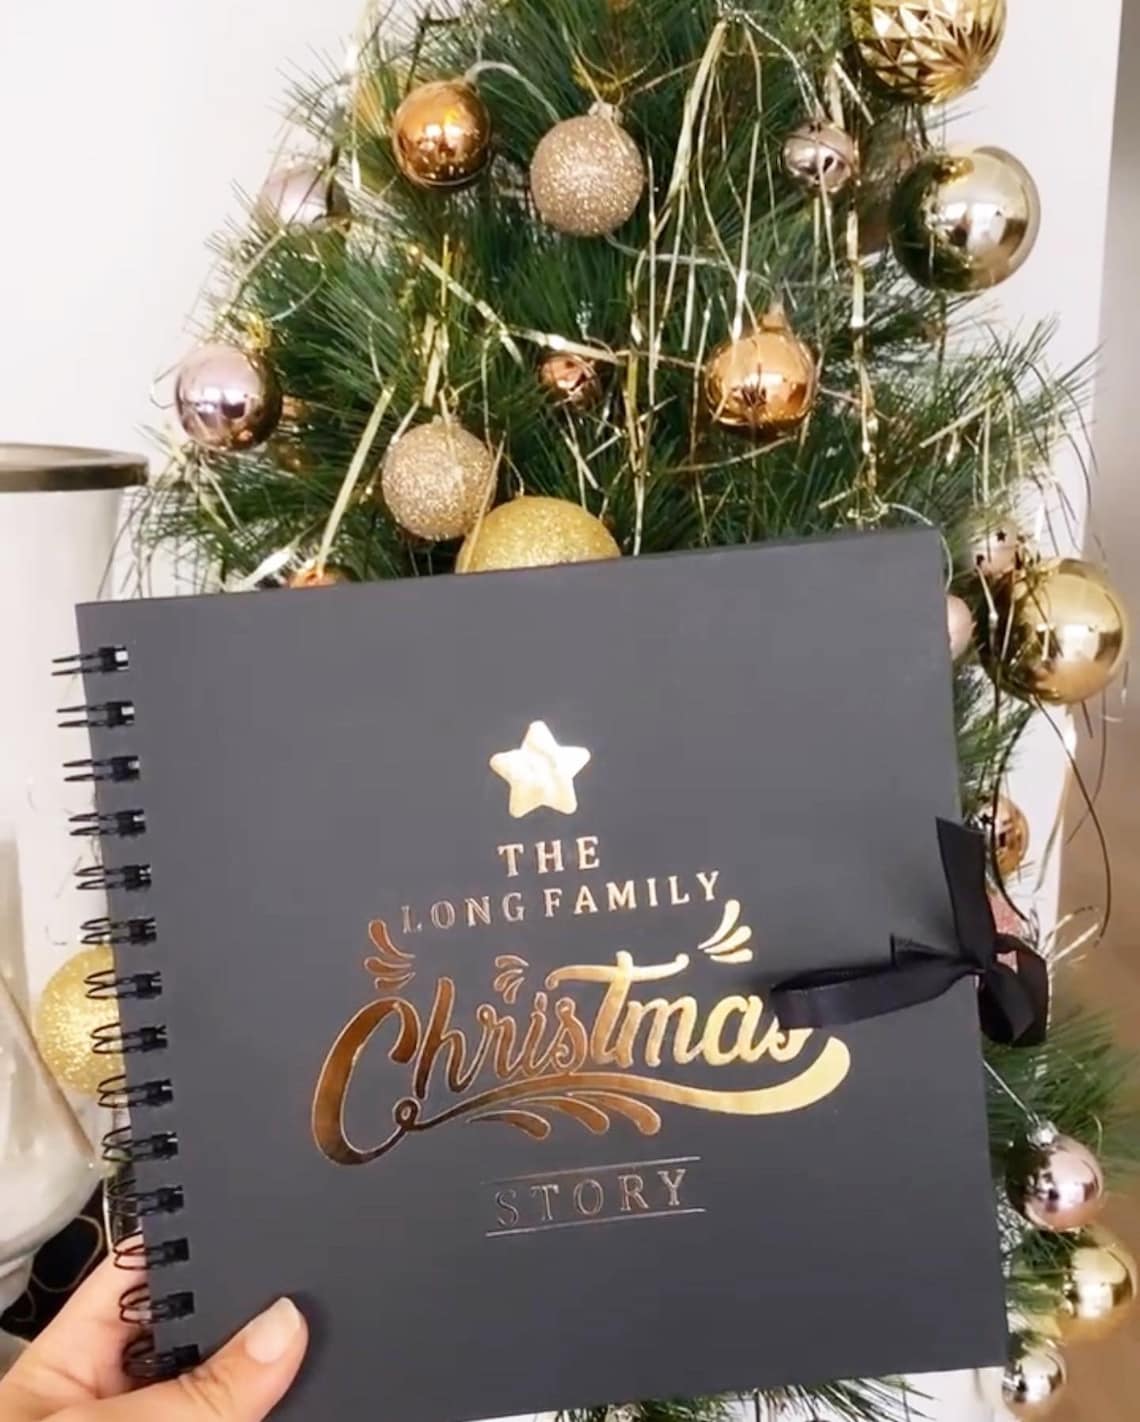 Our Christmas Story Book